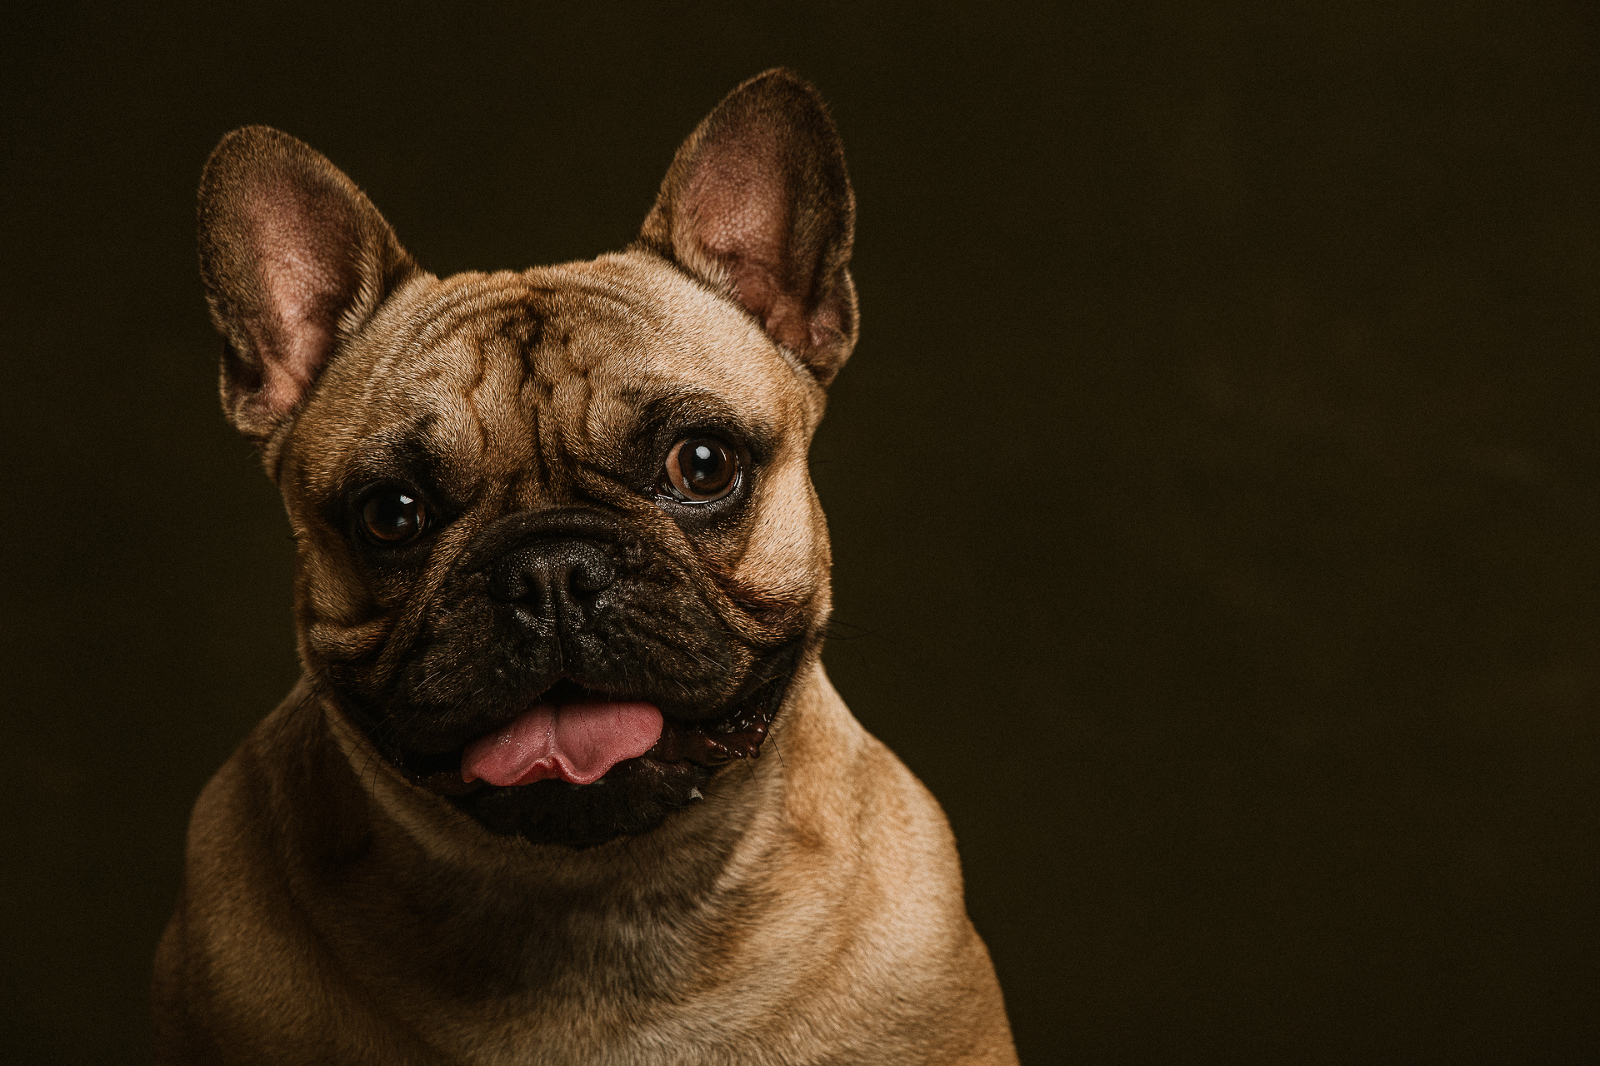 Studio photo of dog with tongue out